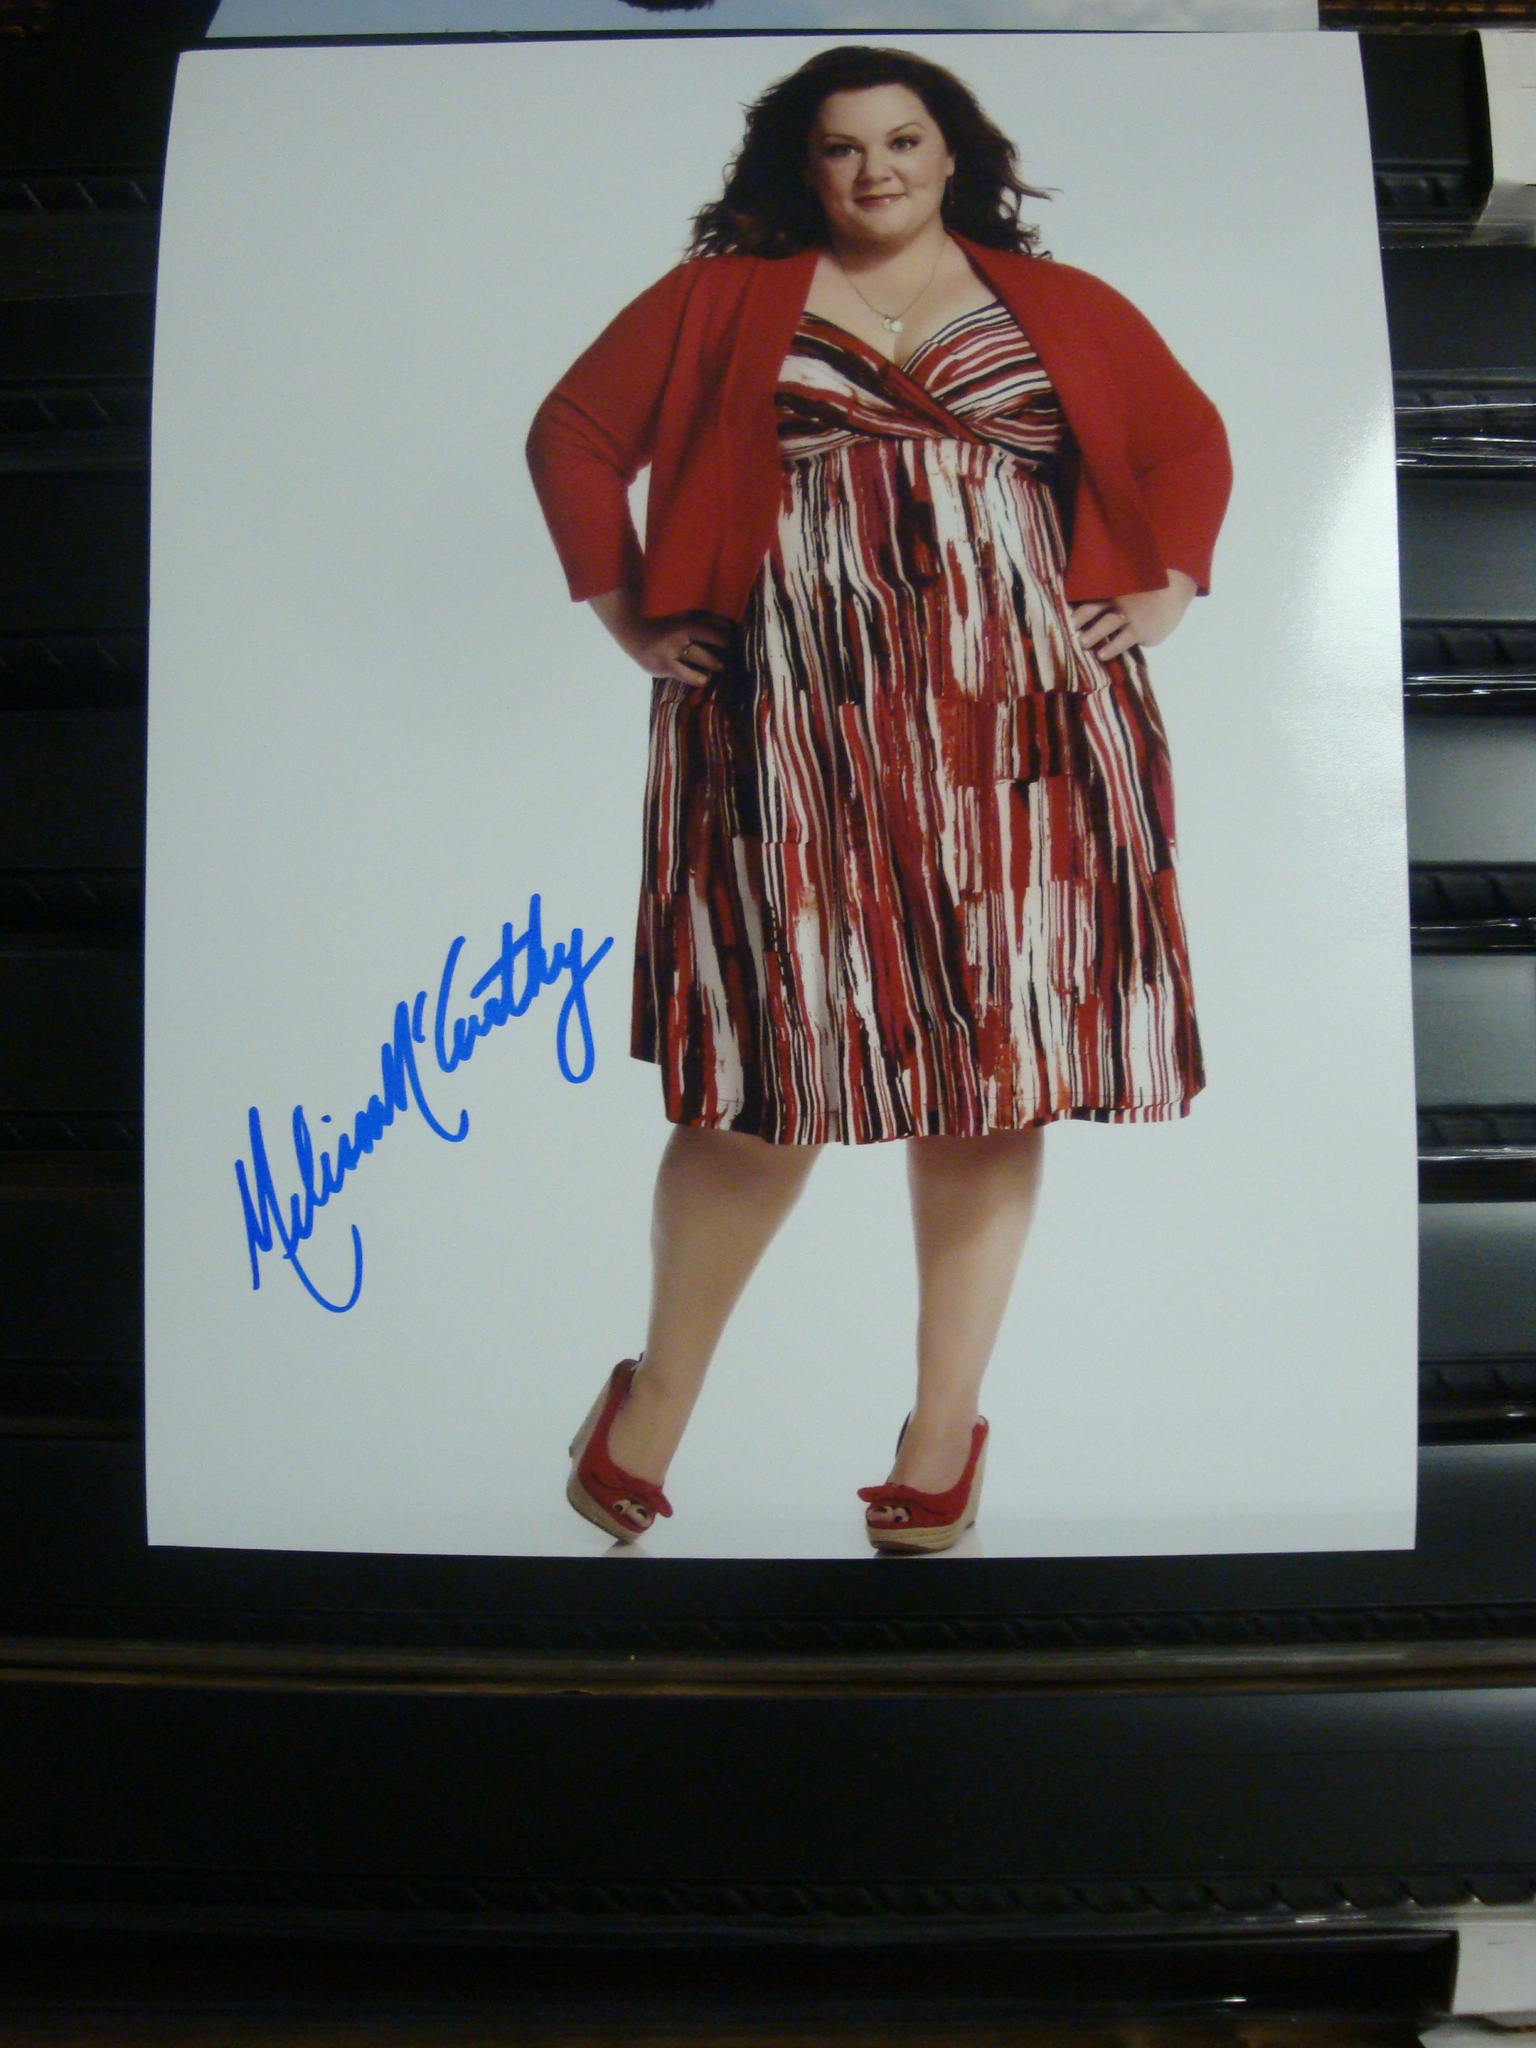 Mike & Molly - Melissa McCarthy signed